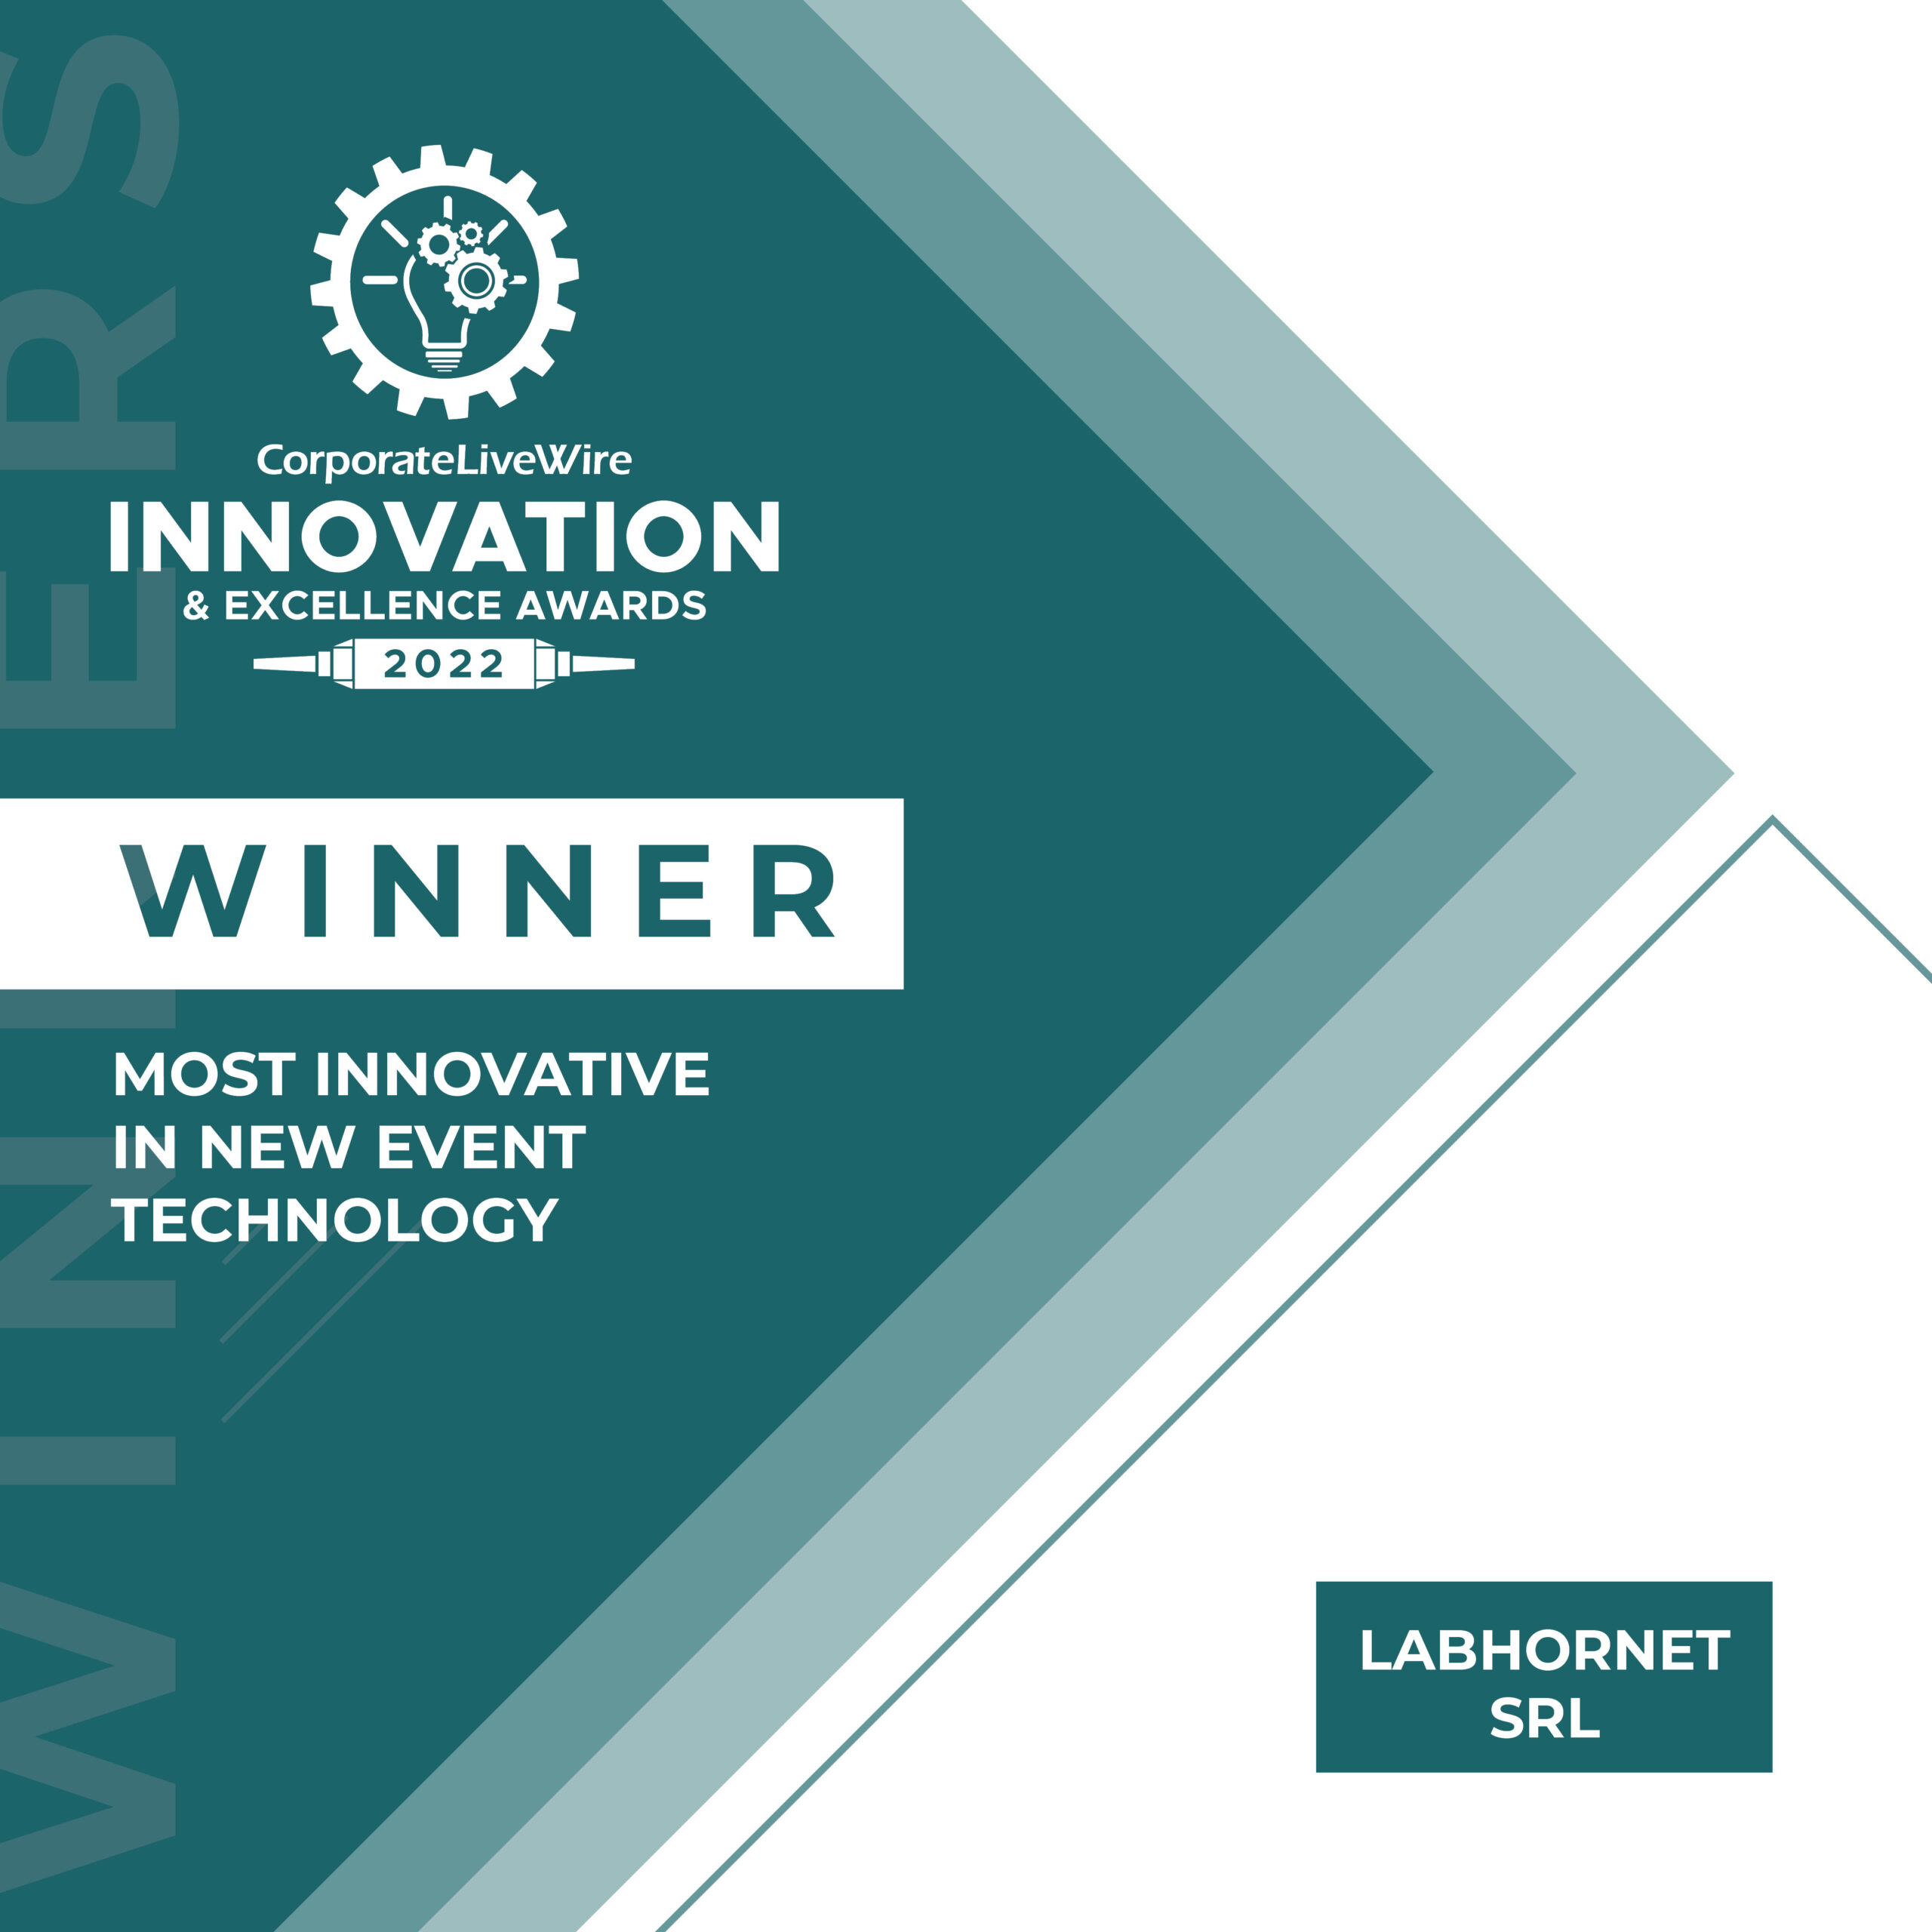 VINOPHILA SI AGGIUDICA L’INNOVATION & EXCELLENCE AWARD 2022 COME MOST INNOVATIVE IN NEW EVENT TECHNOLOGY